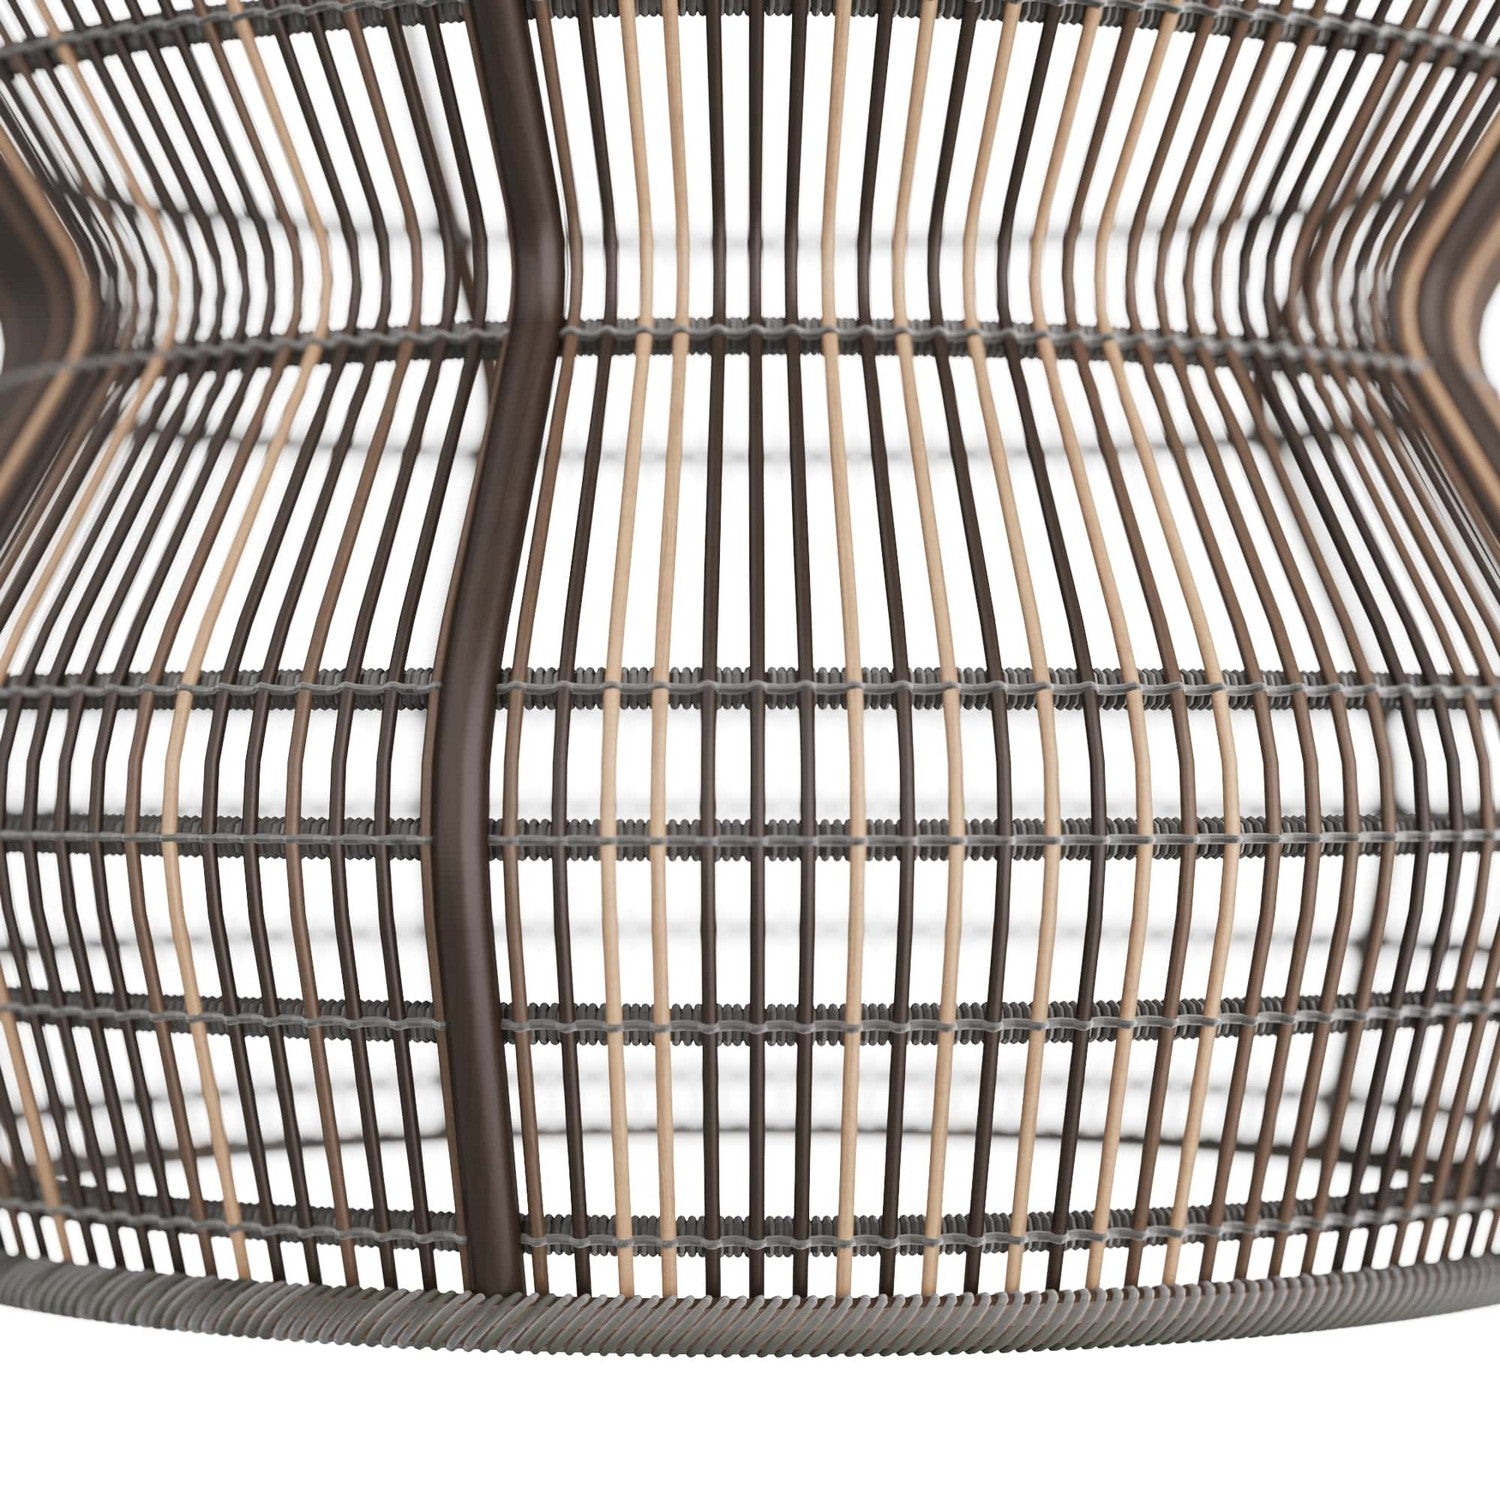 One Light Pendant from the Turks collection in Dark Brown Stained finish